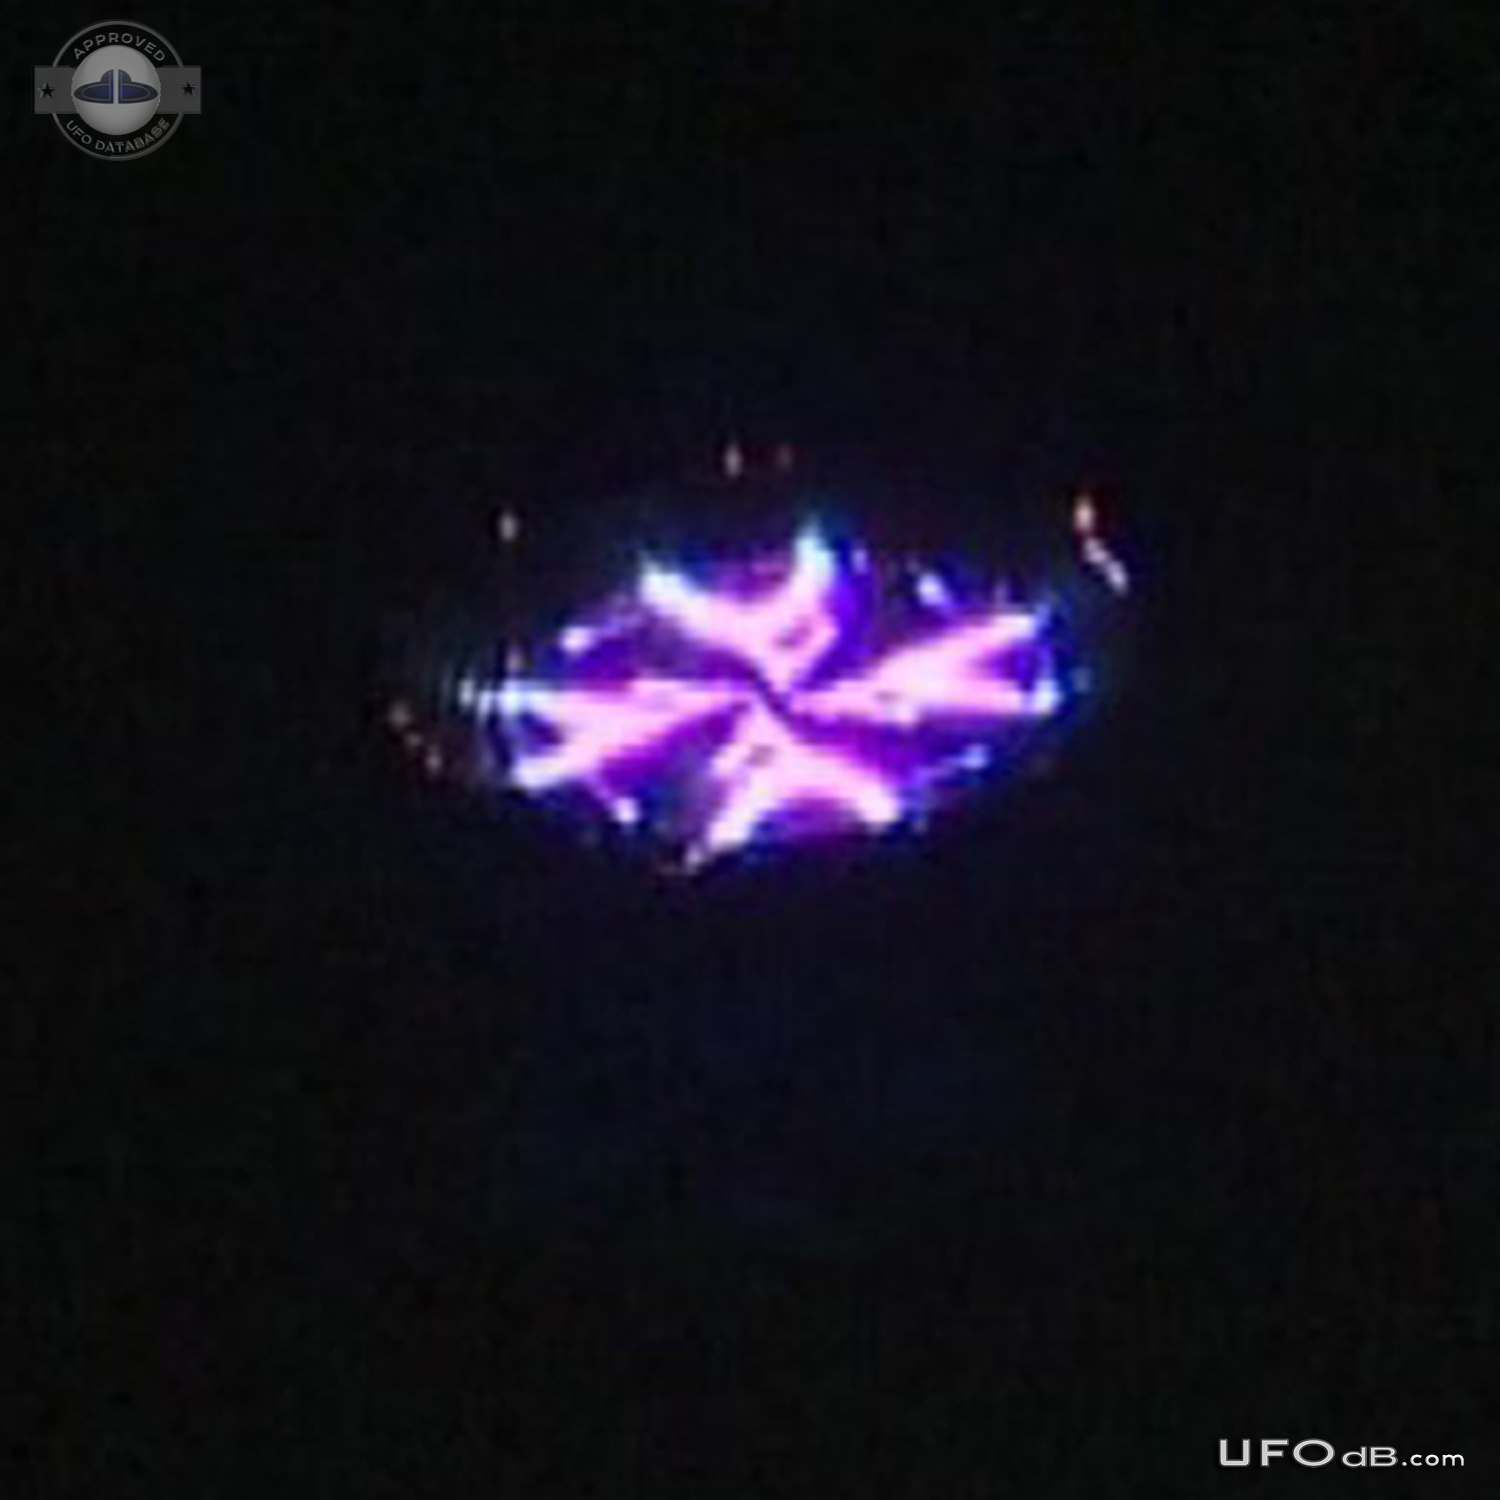 It was a big flying object UFO with purple or teal light - Los Banos UFO Picture #597-3